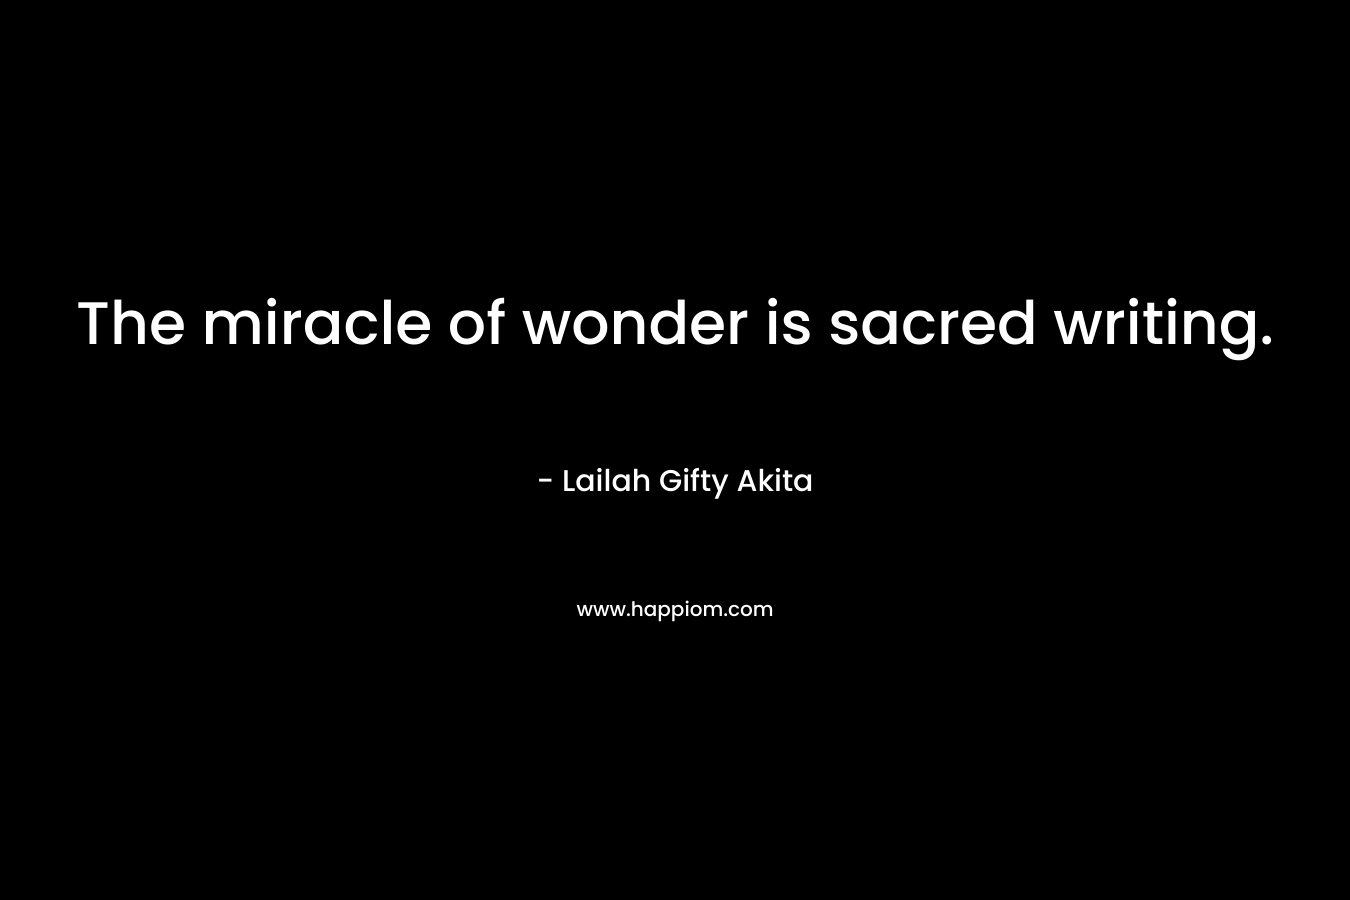 The miracle of wonder is sacred writing.